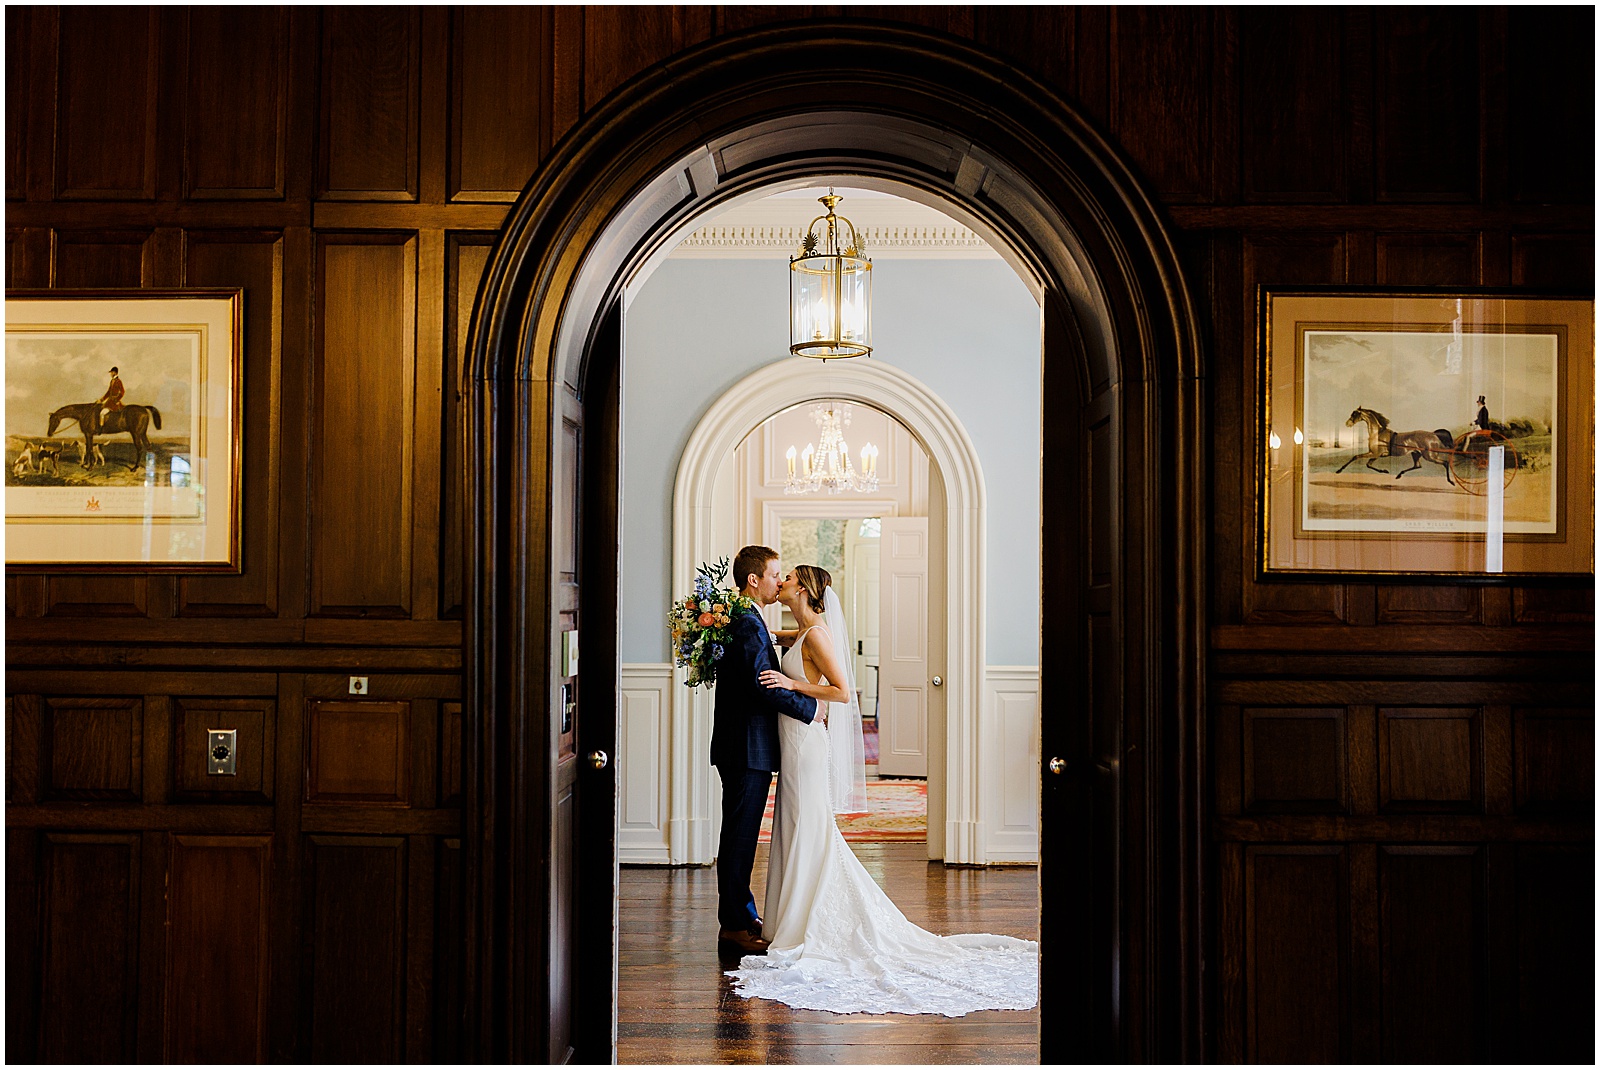 A bride and groom kiss in the hall at Bellevue Hall.